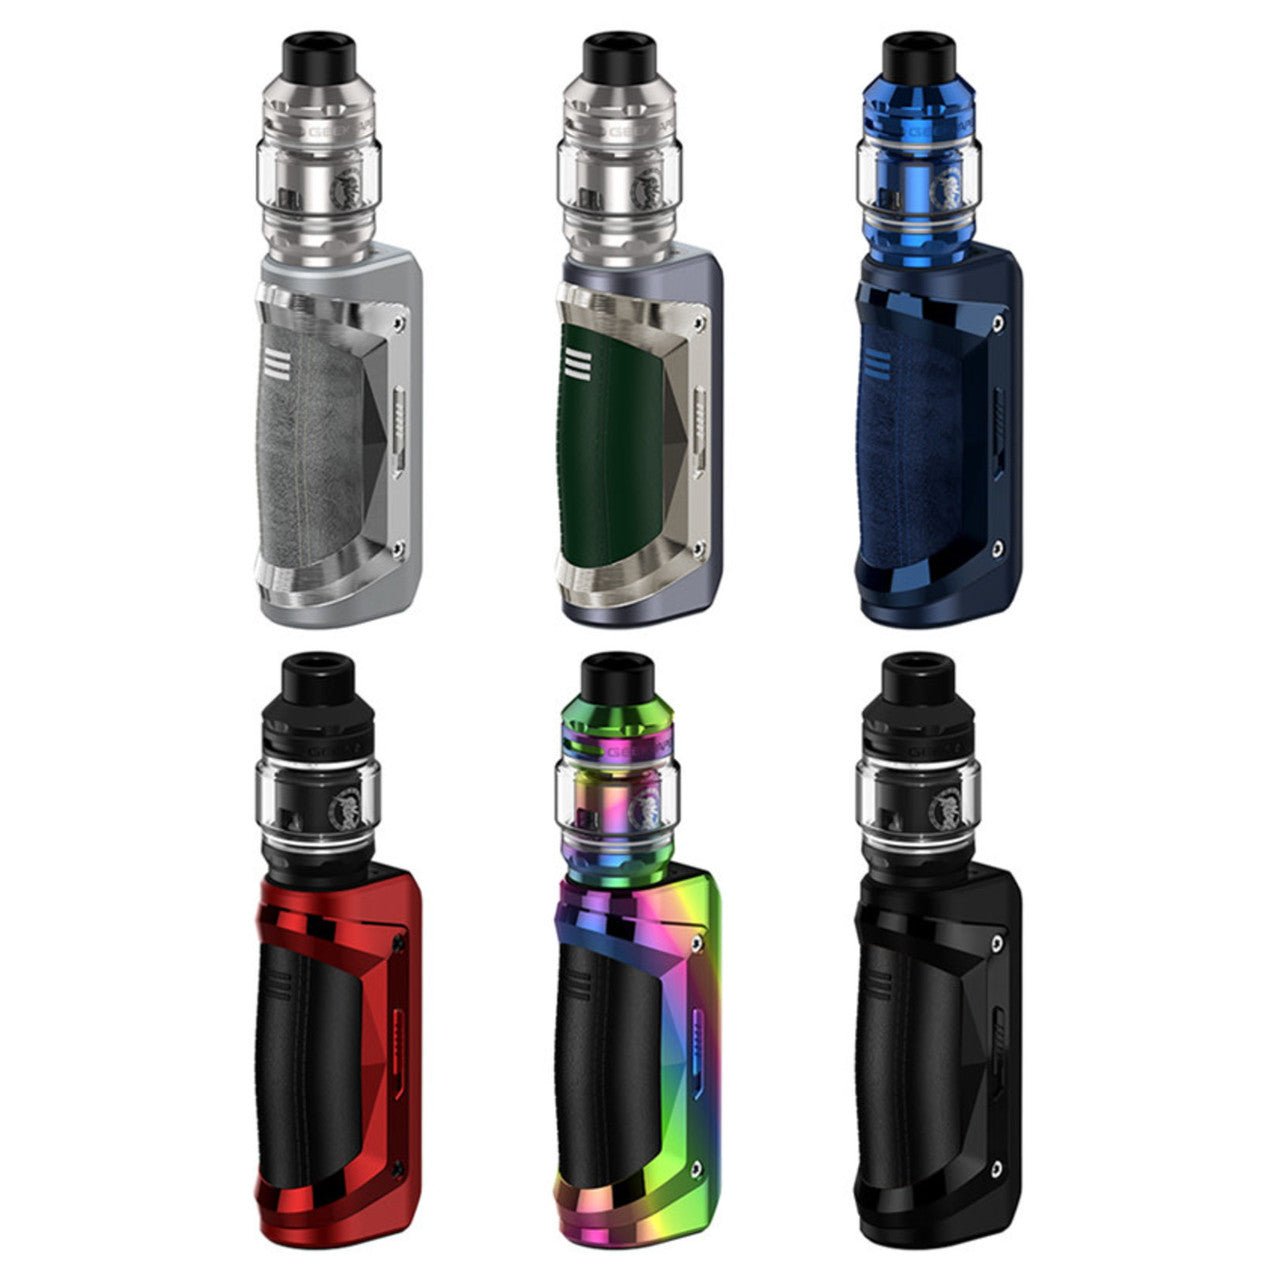 GEEKVAPE S100 SOLO KIT - EJUICEOVERSTOCK.COM